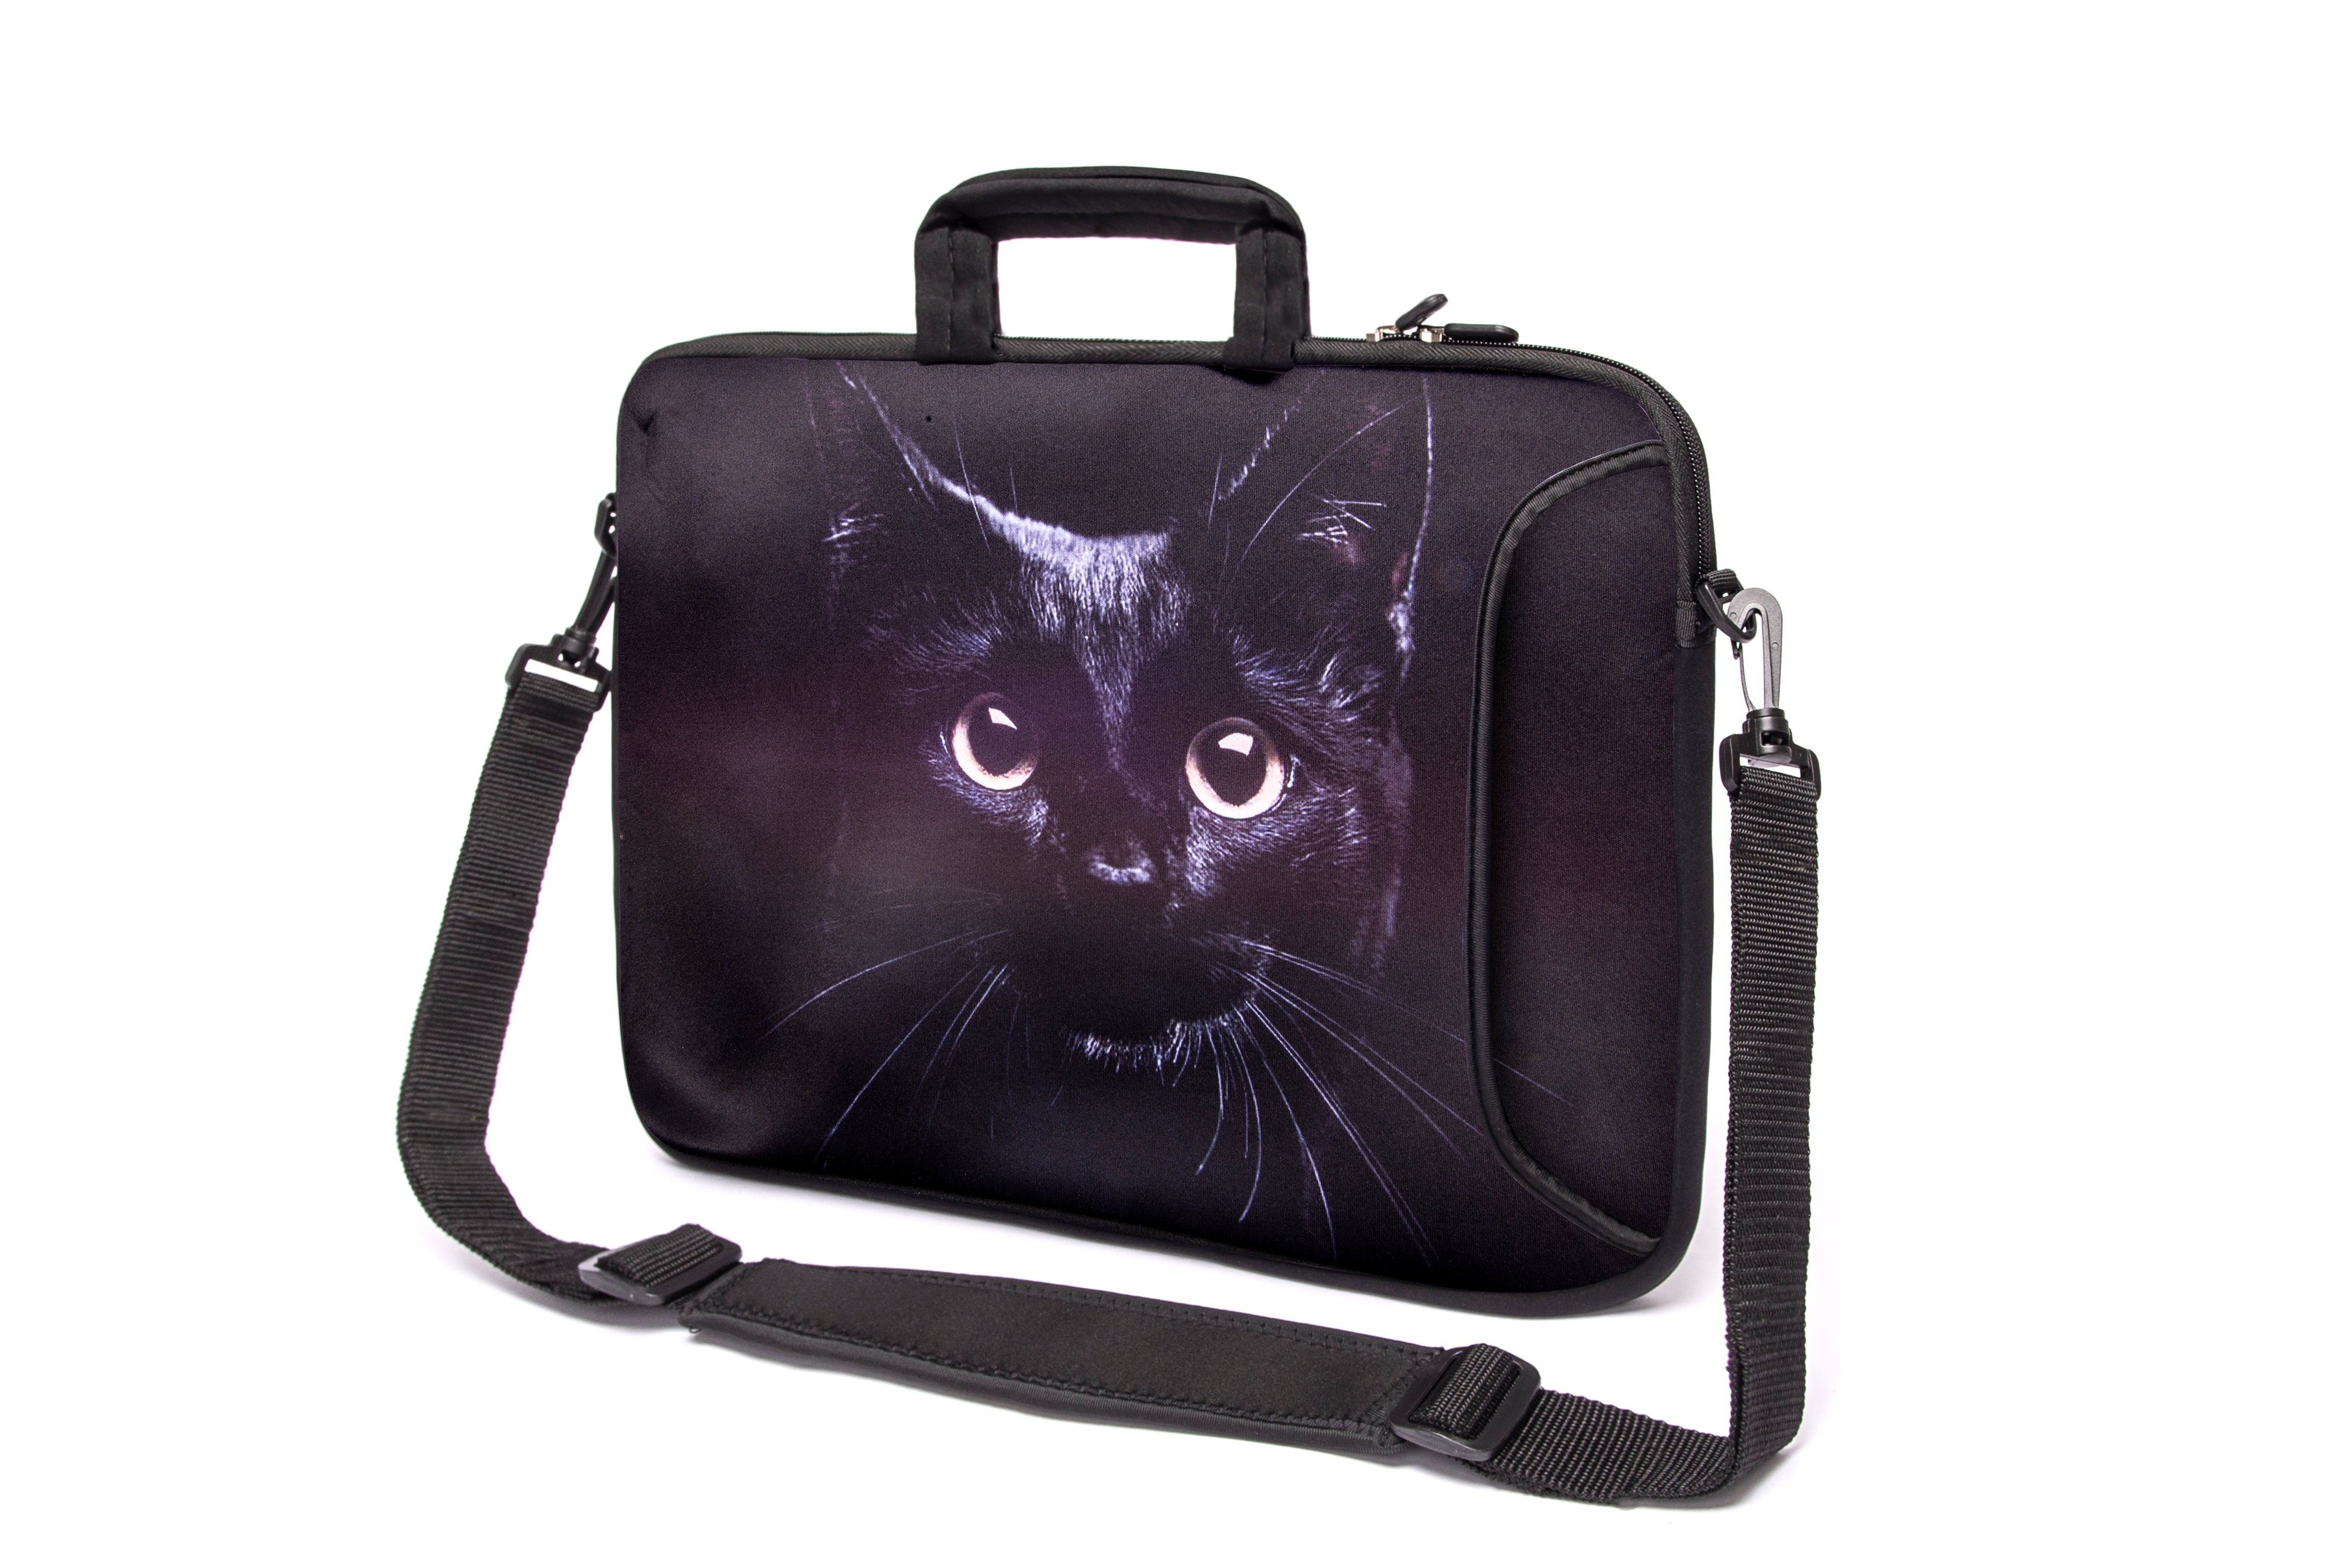 15"- 15.6" (inch) LAPTOP BAG CARRY CASE/BAG WITH HANDLE & STRAP NEOPRENE FOR LAPTOPS/NOTEBOOKS, *Black Cat*